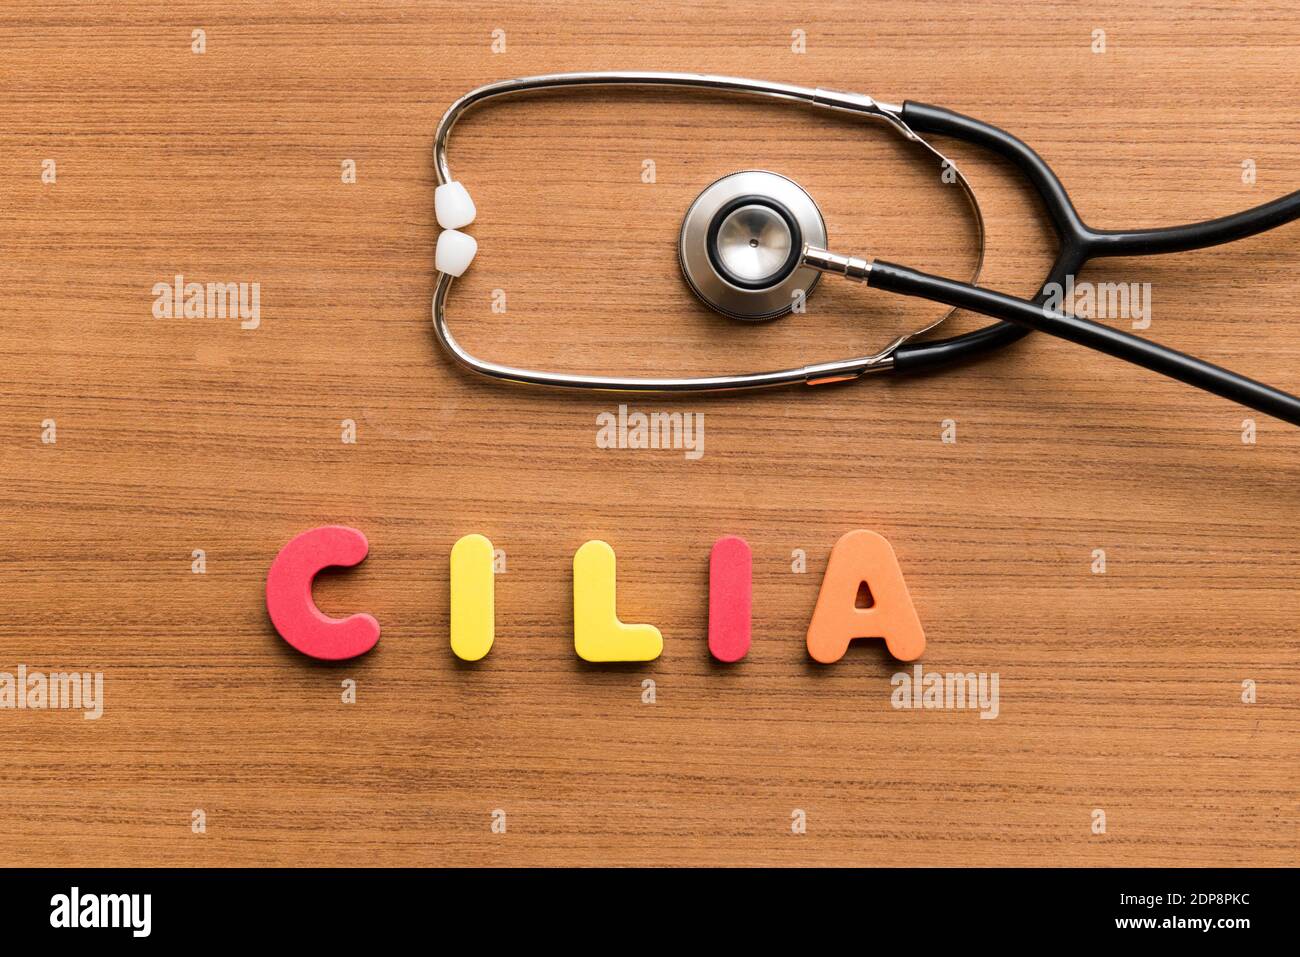 Directly Above Shot Of Stethoscope With Colorful Text On Wooden Table Stock Photo